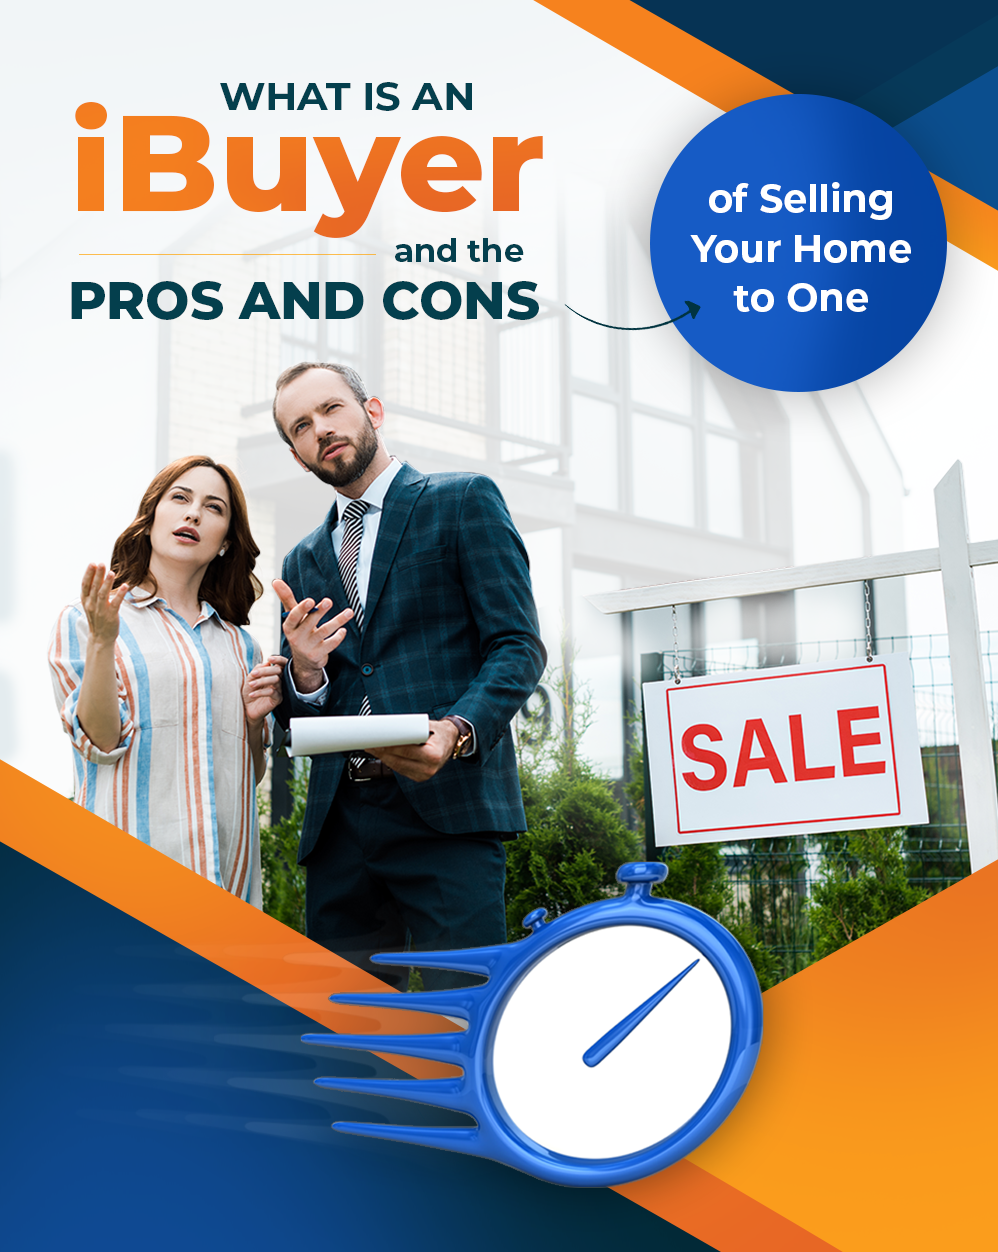 What is an iBuyer and the pros and cons